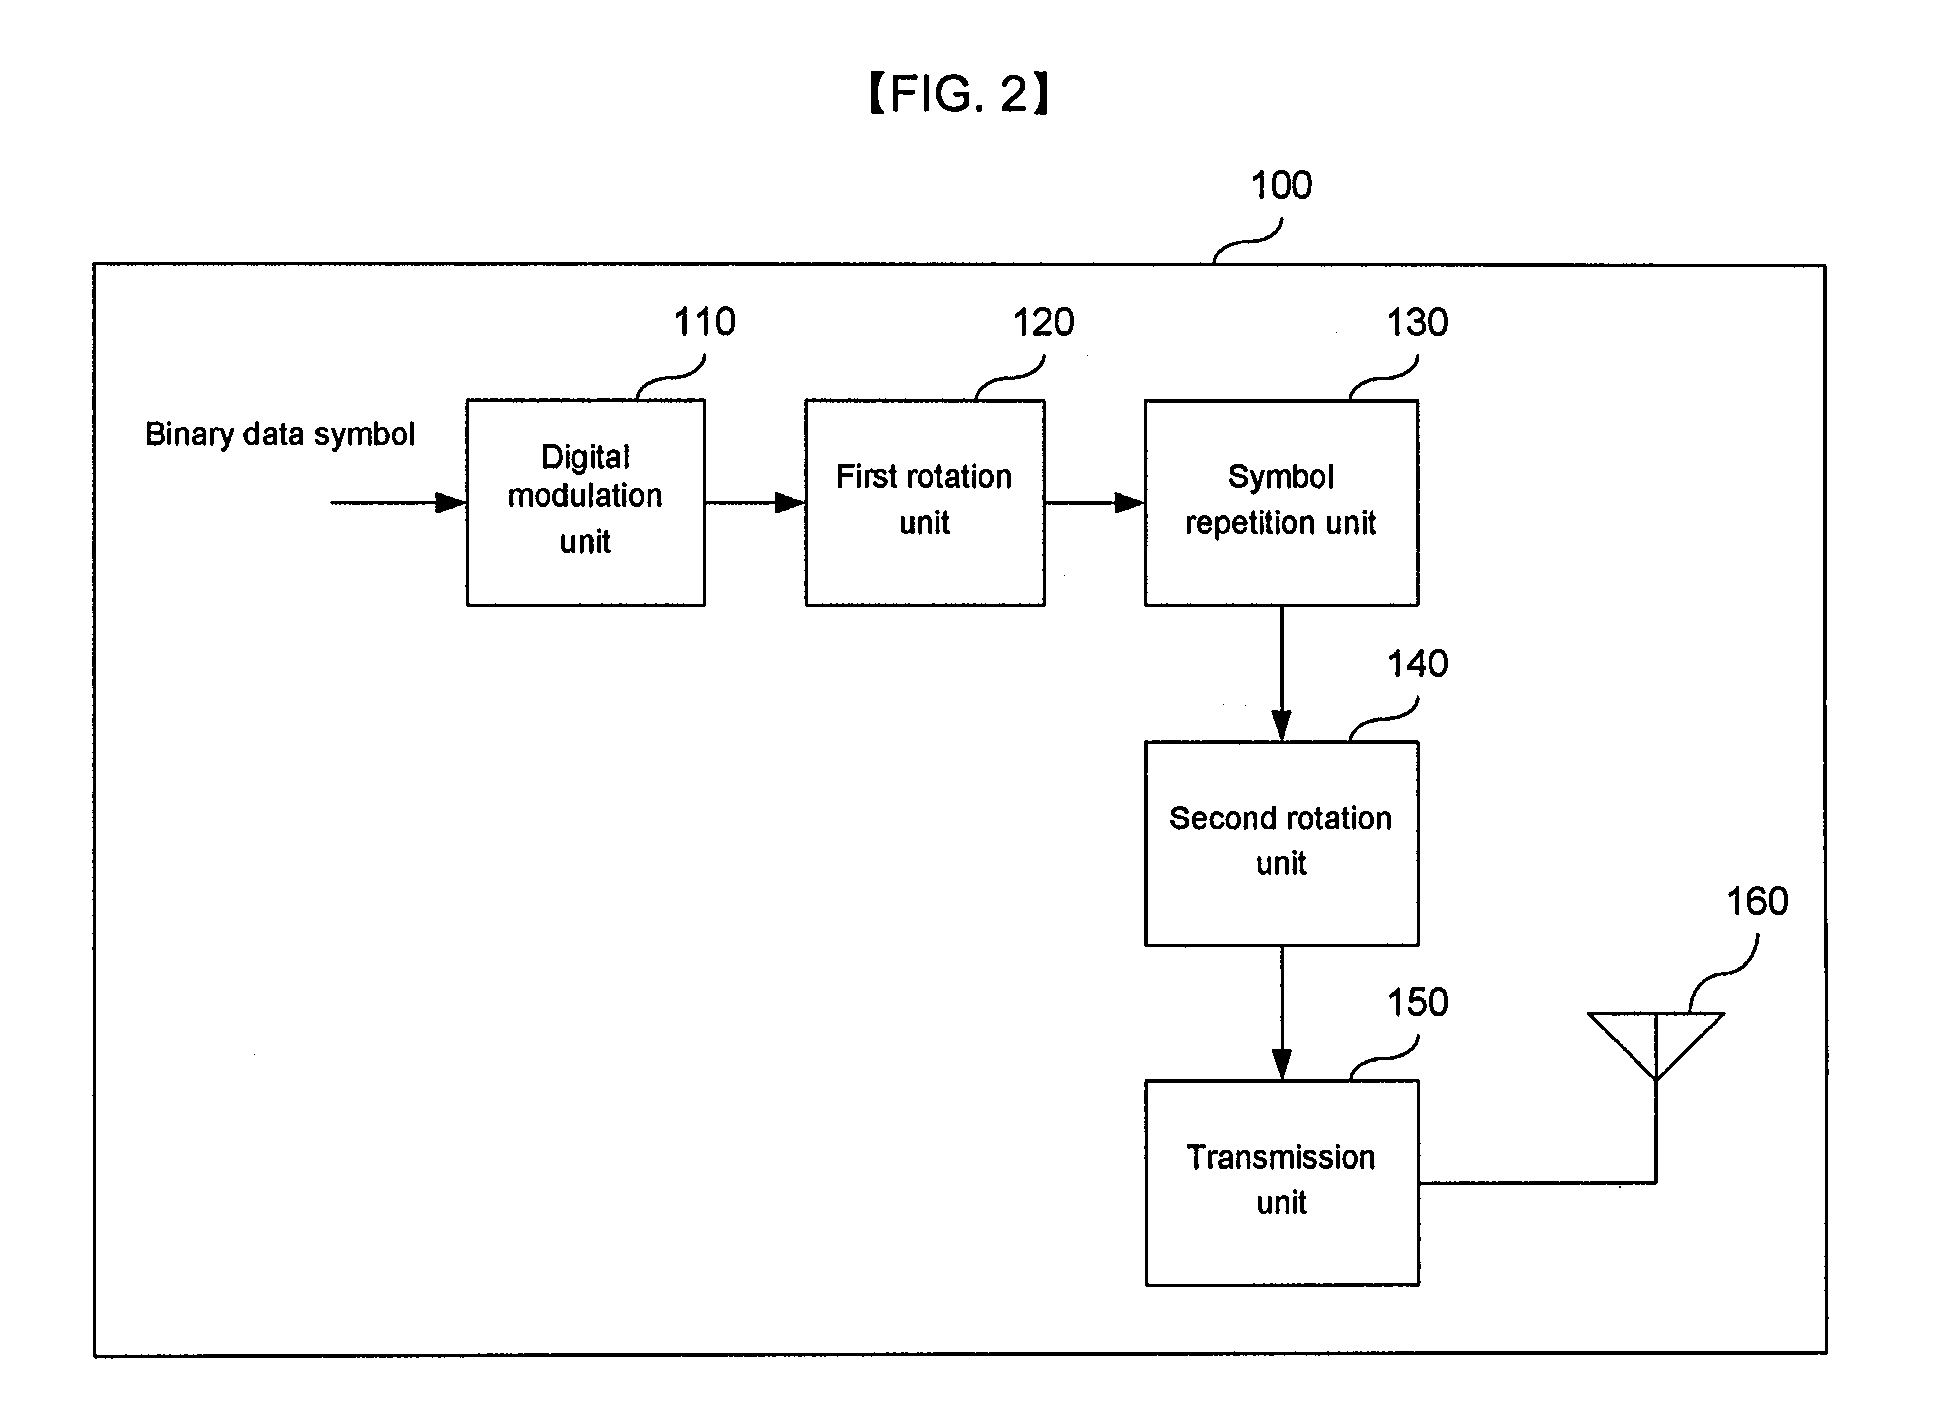 Apparatus and Method for Generating Signal According to Ifdma, and Apparatus for Receiving Signal